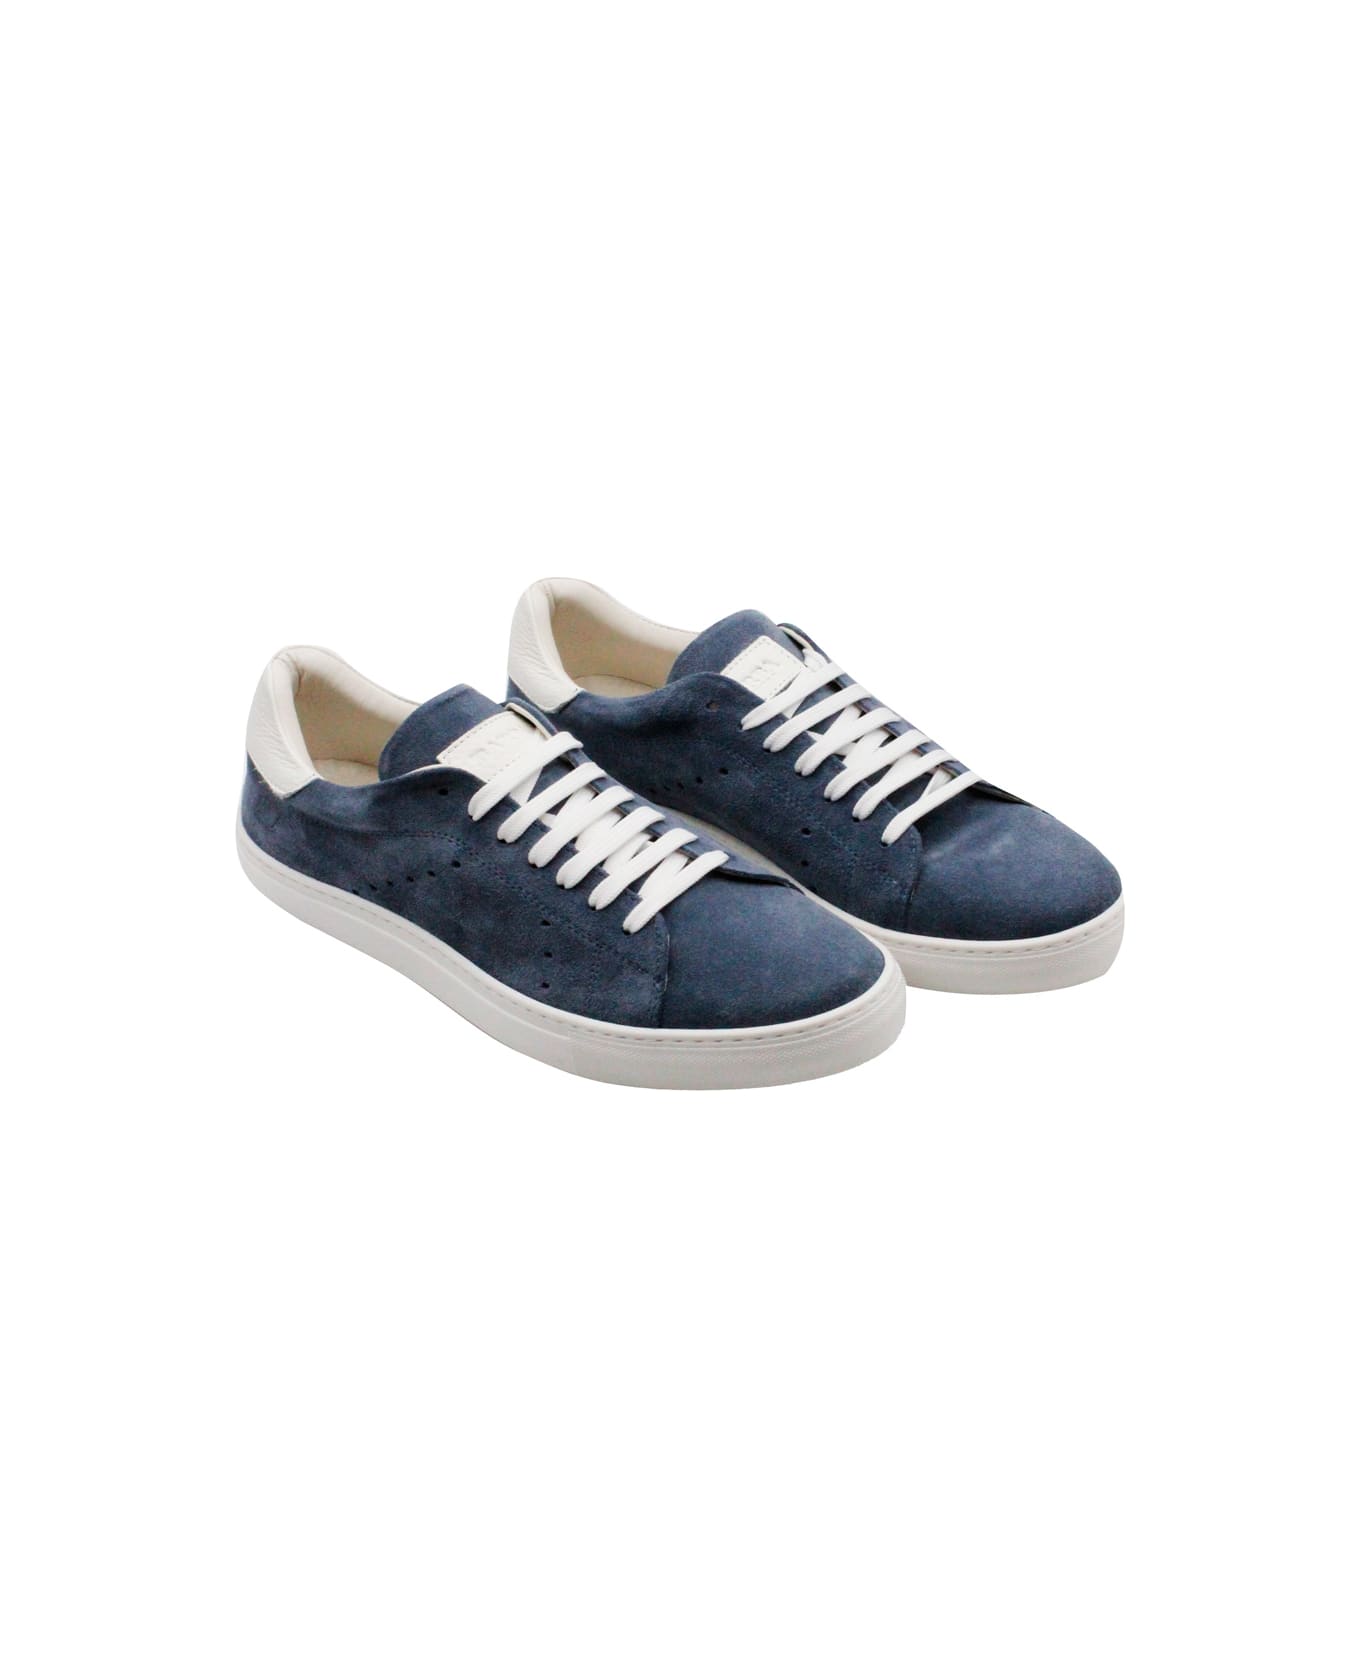 Barba Napoli Sneakers In Soft And Fine Perforated Suede With Lace Closure And Leather Rear Part - Light Blu